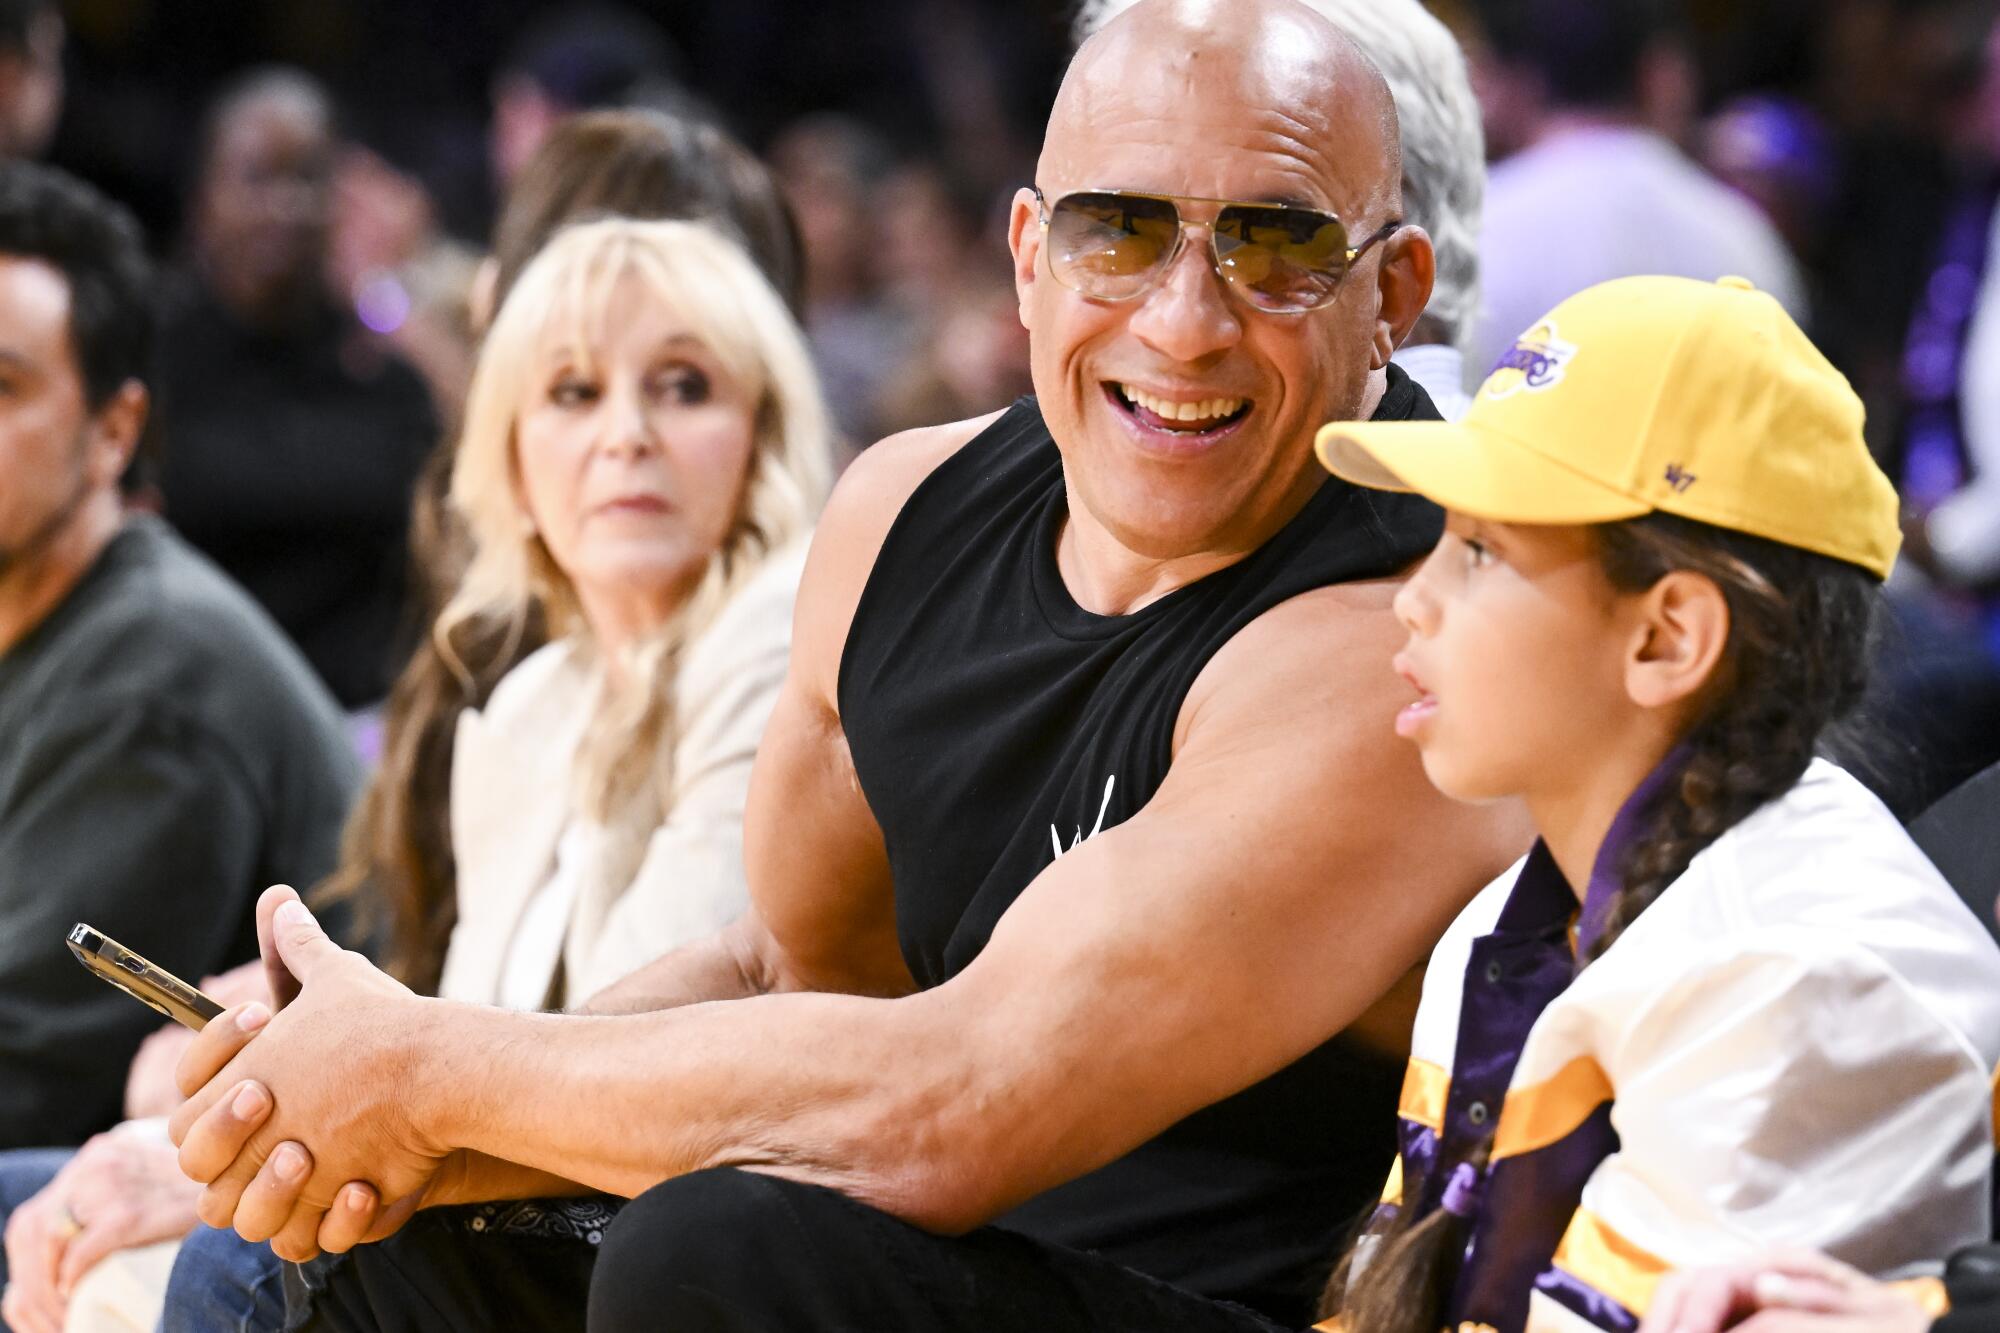 Vin Diesel attends game four in the NBA Playoffs Western Conference Finals at Crypto.com Arena.